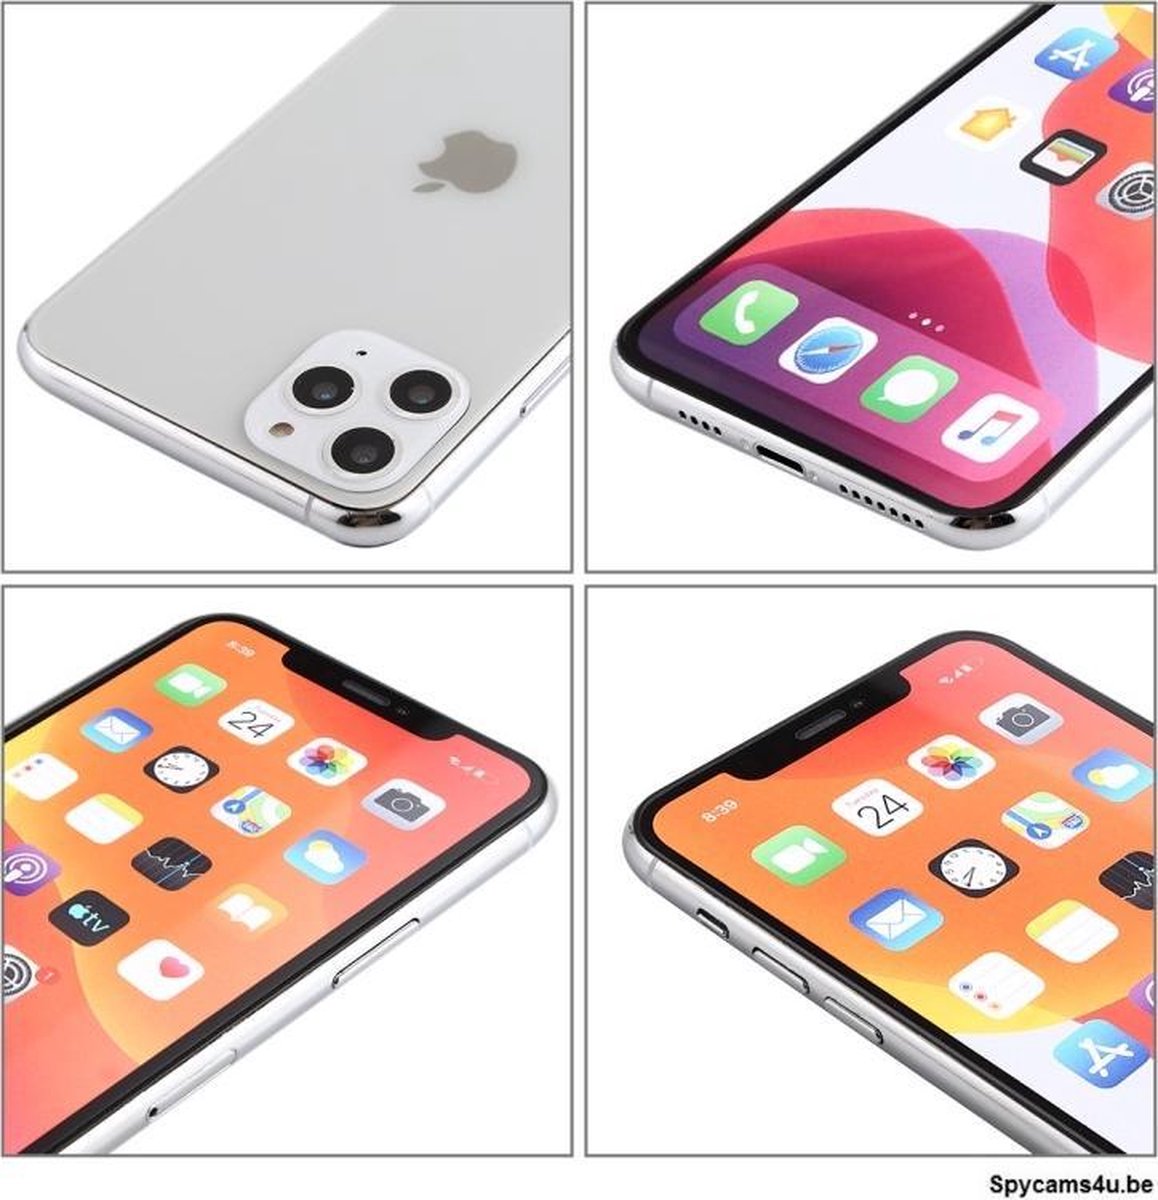 iPhone 11 Pro Max dummy model (wit) - display model iPhone 11 Pro Max - showroom model iPhone 11 Pro Max